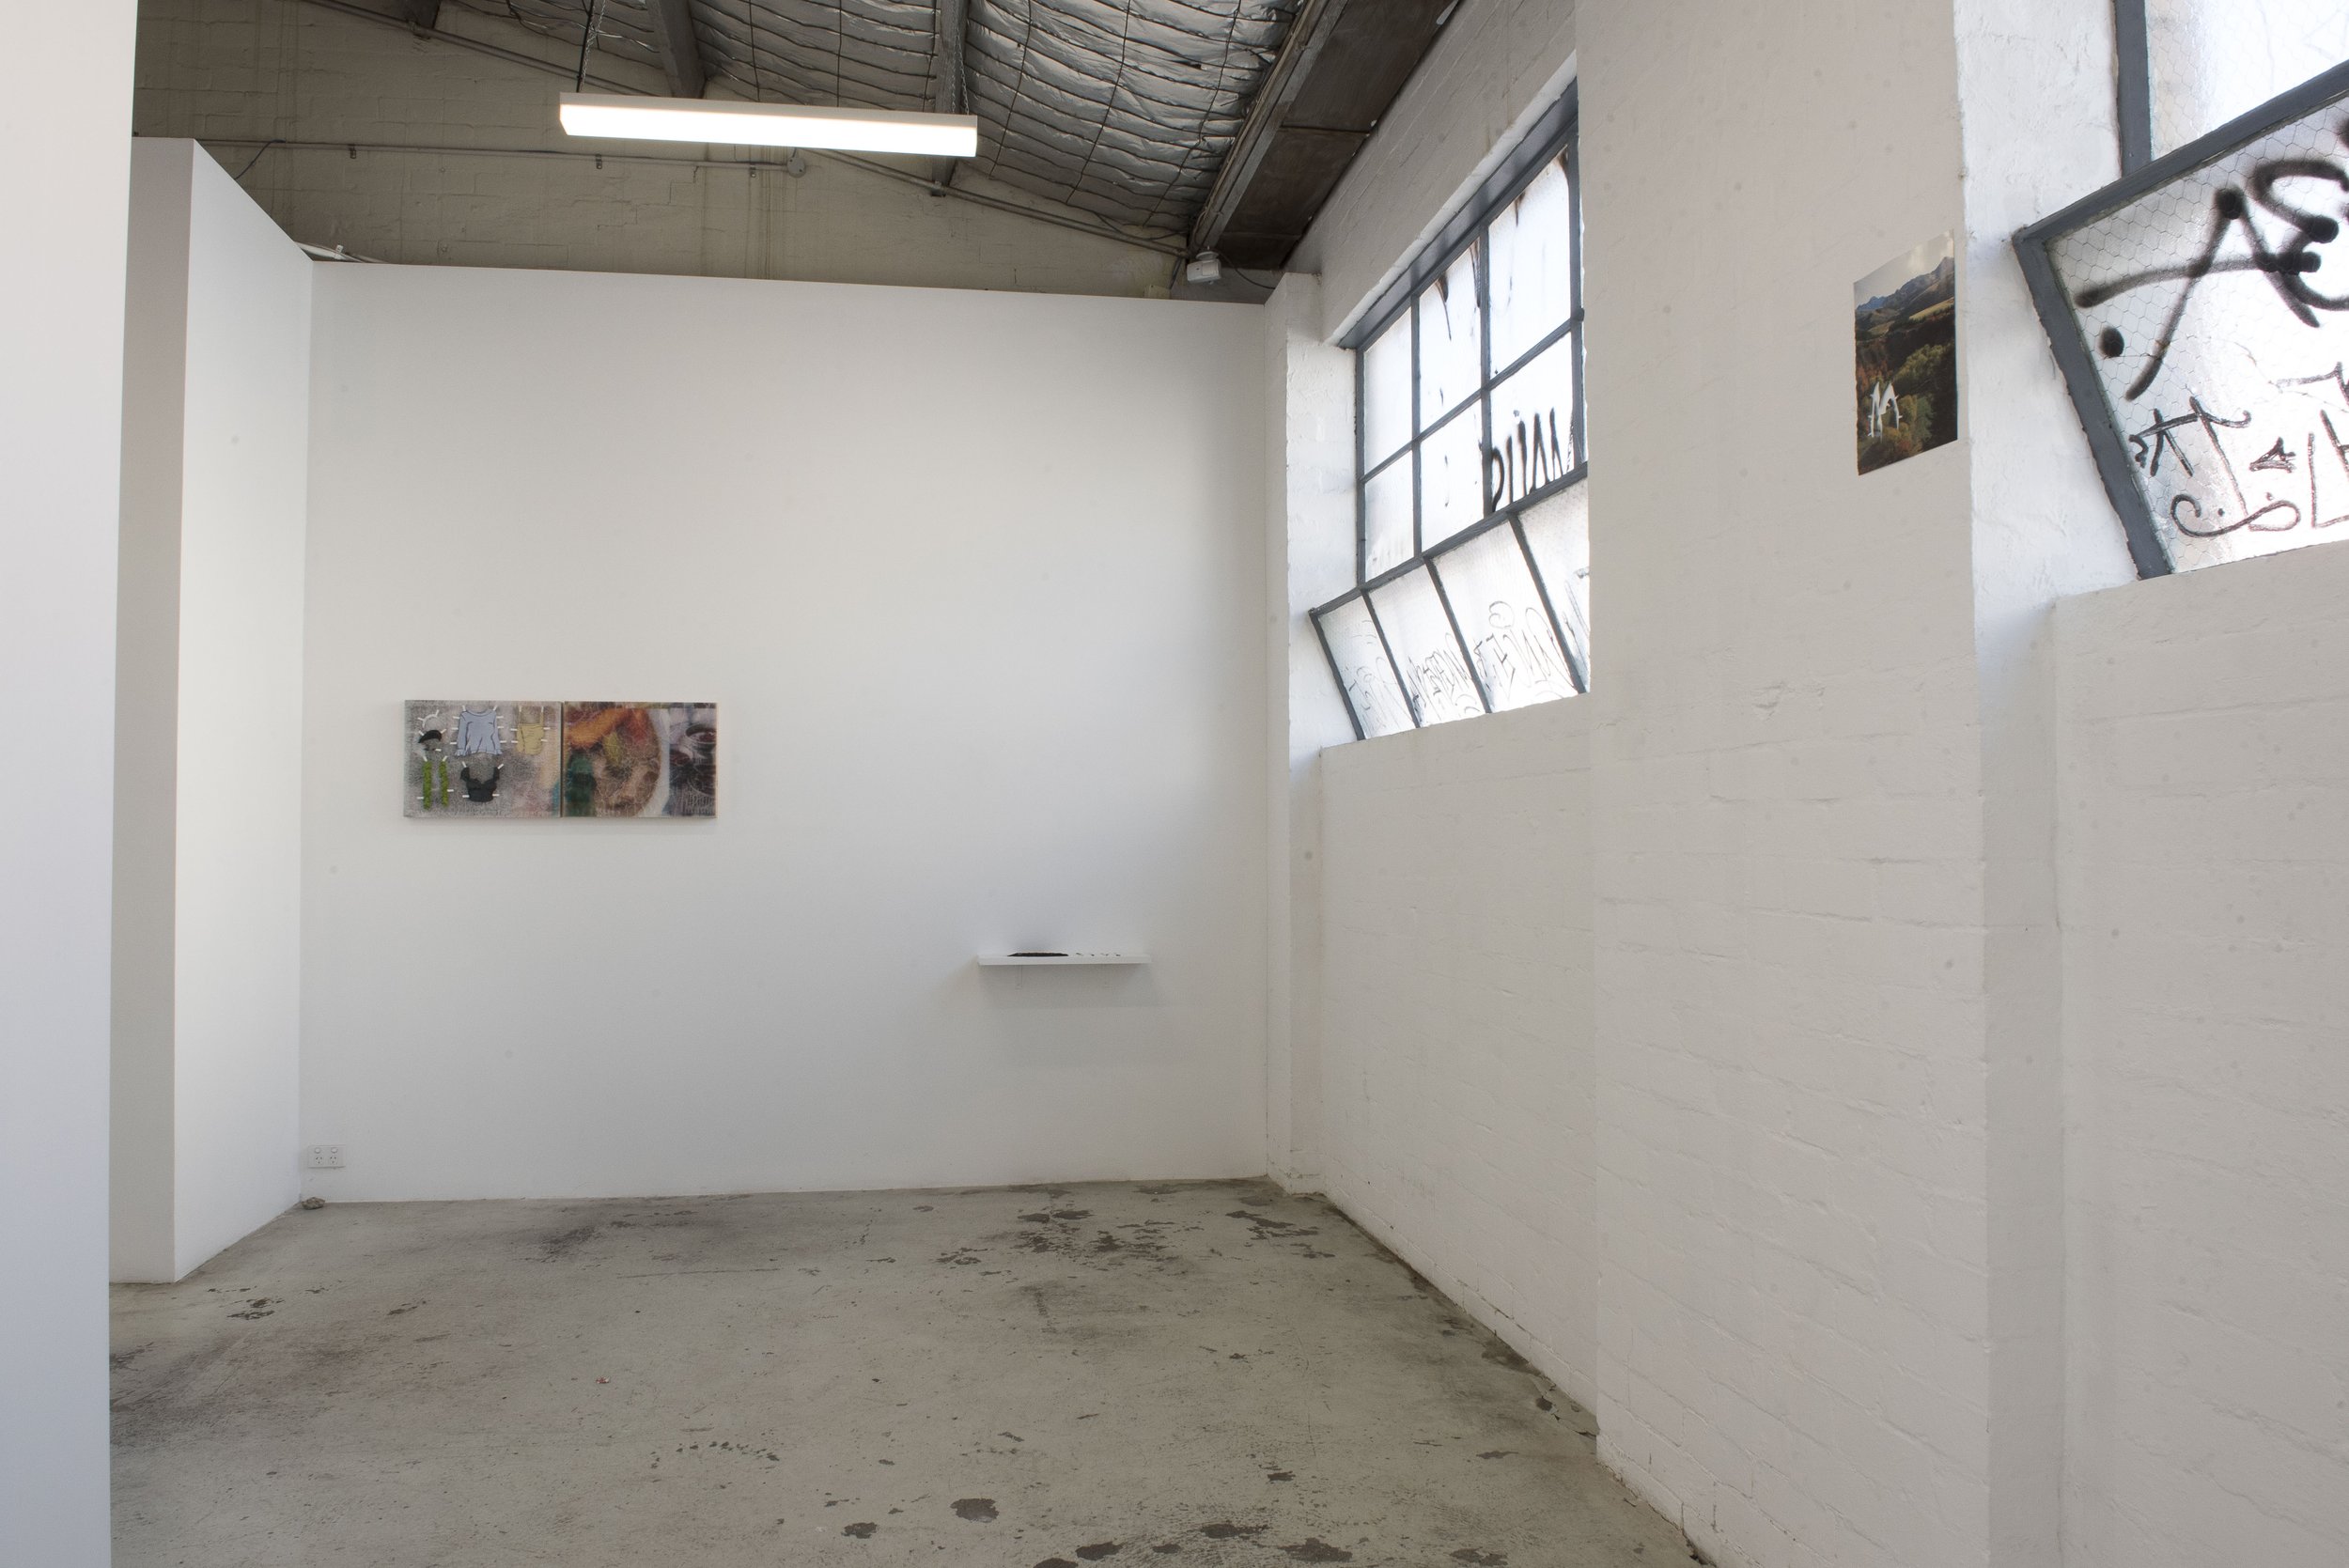   panoply (she dresses up like that to go out for noodles?)     Installation view at TCB.    Image courtesy of Jordan Halsall. 